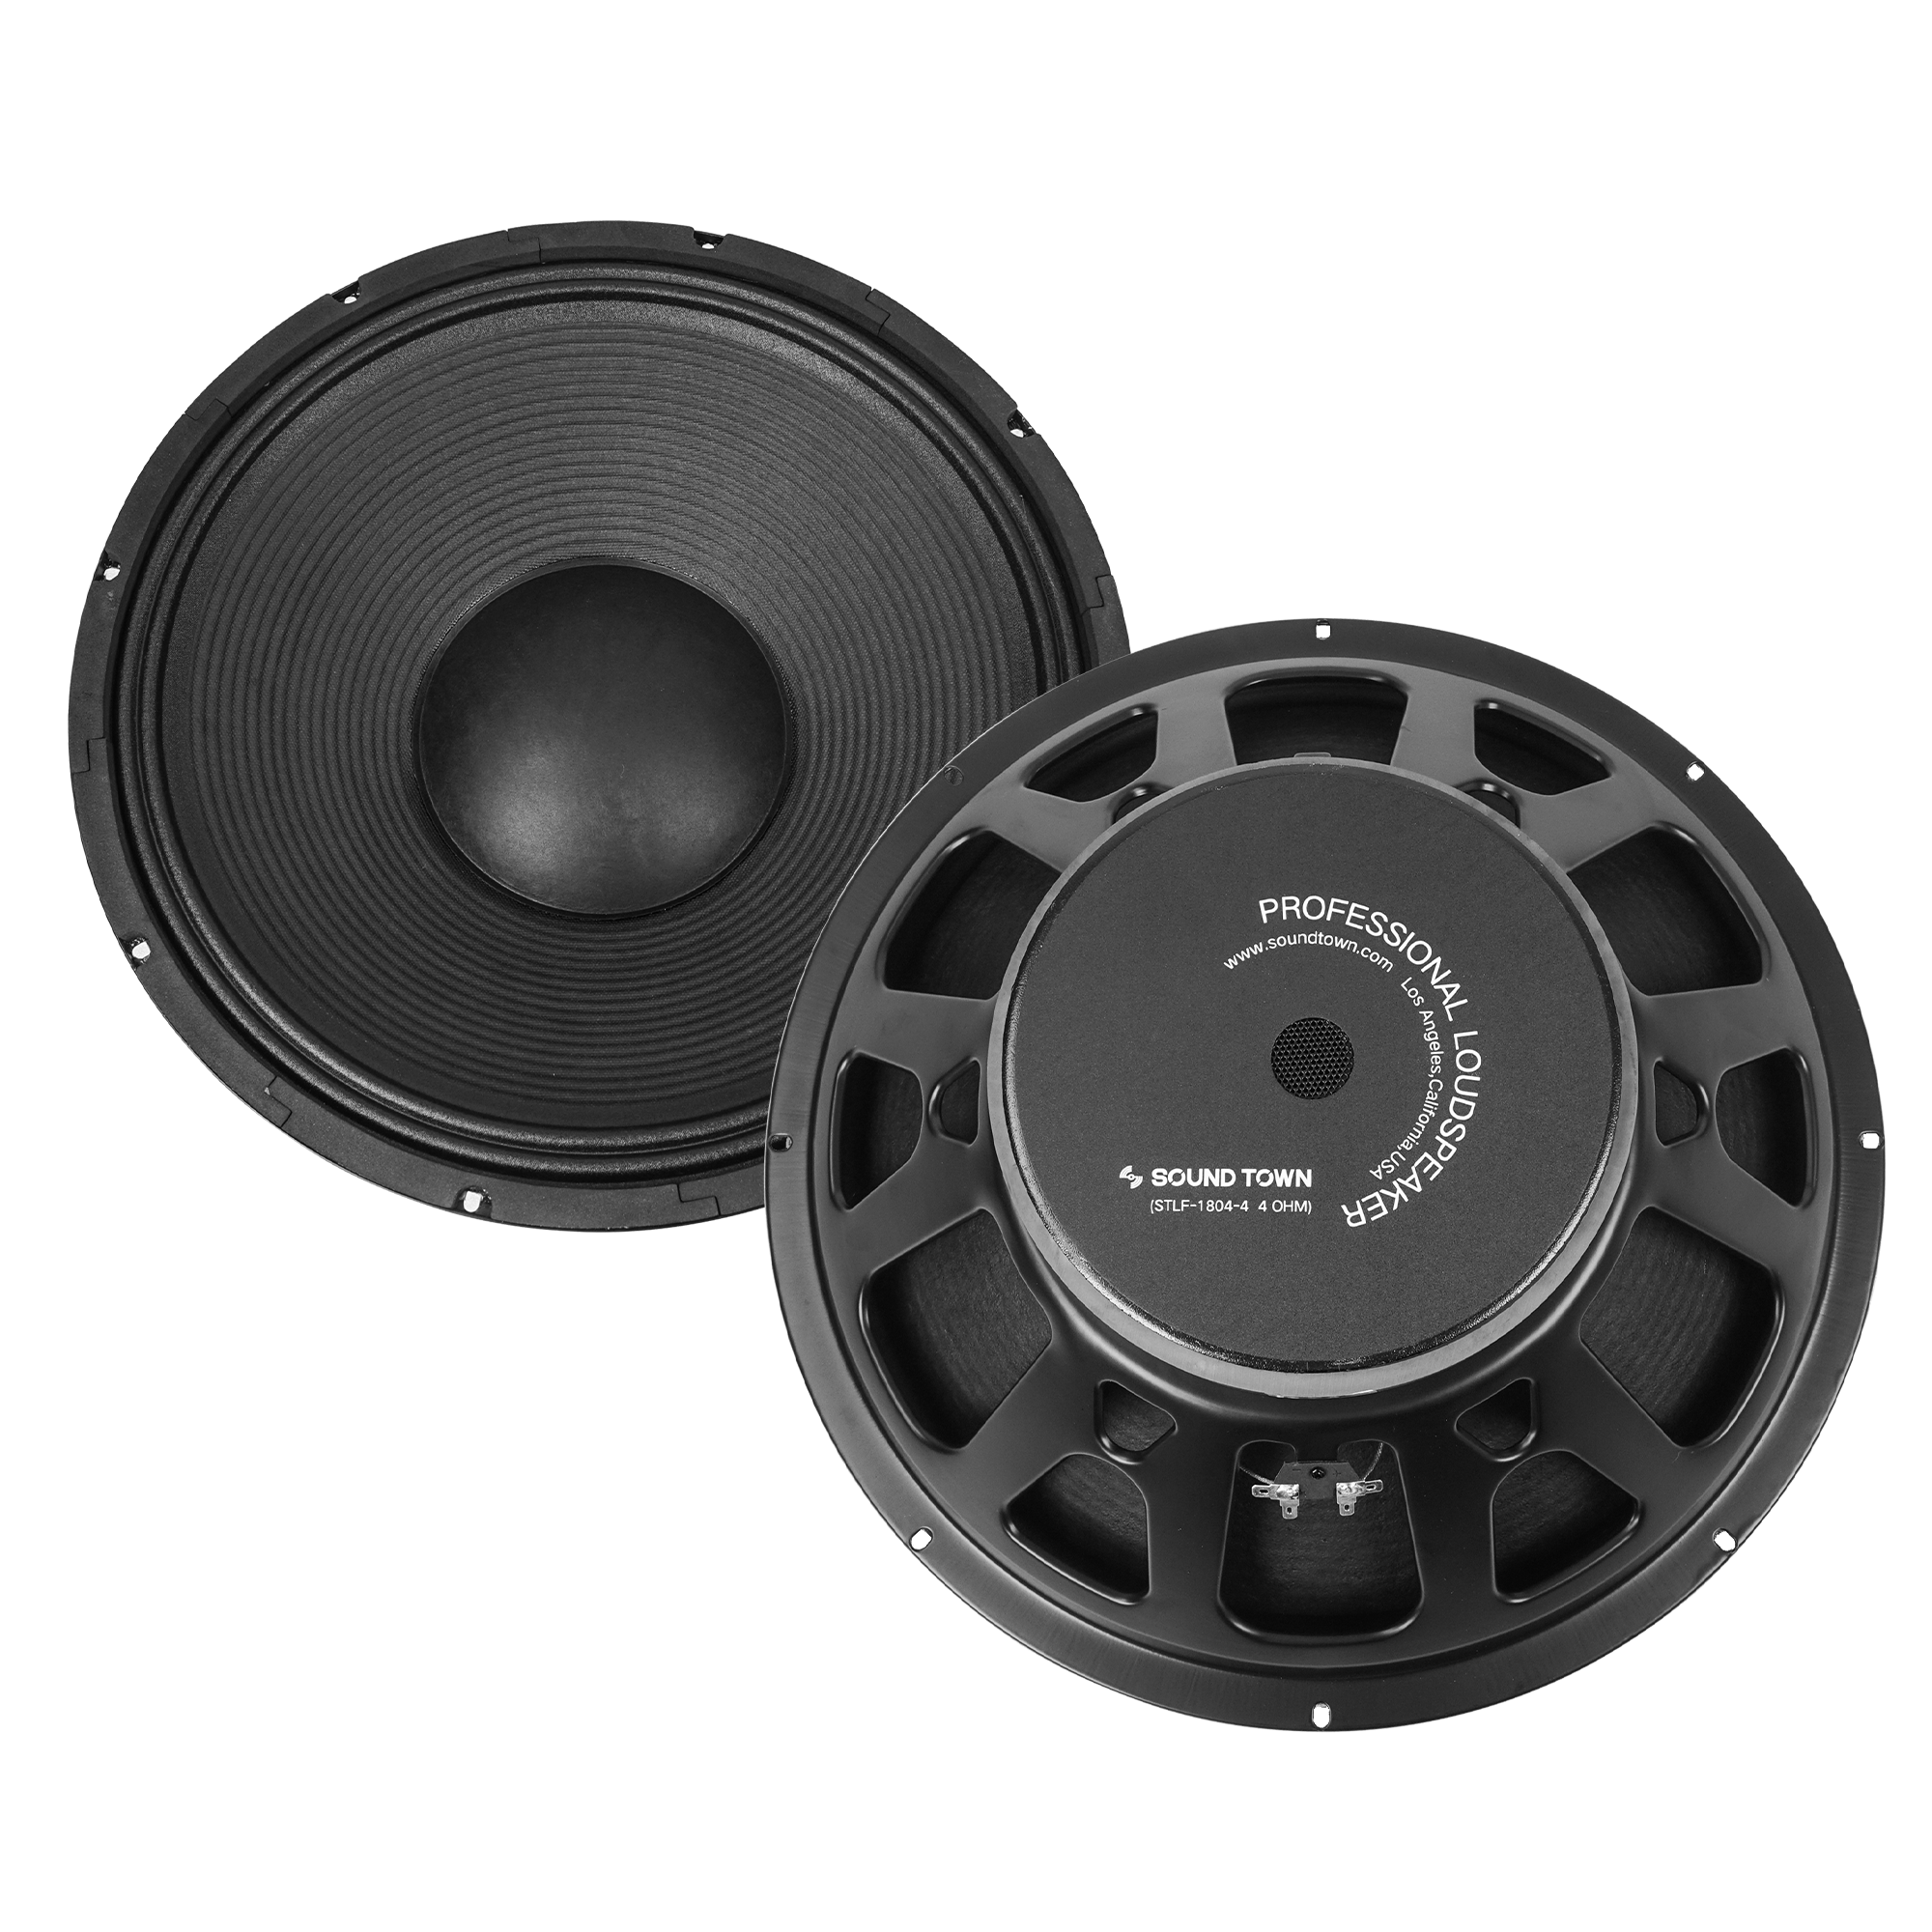 Sound Town STLF-1804-8 18" 450W Raw Woofer Speaker with 4" Voice Coil, 100 oz Magnet, Replacement for PA/DJ Subwoofer, 8-ohm - 18-inches pressed steel chassis with paper cone and cloth edge